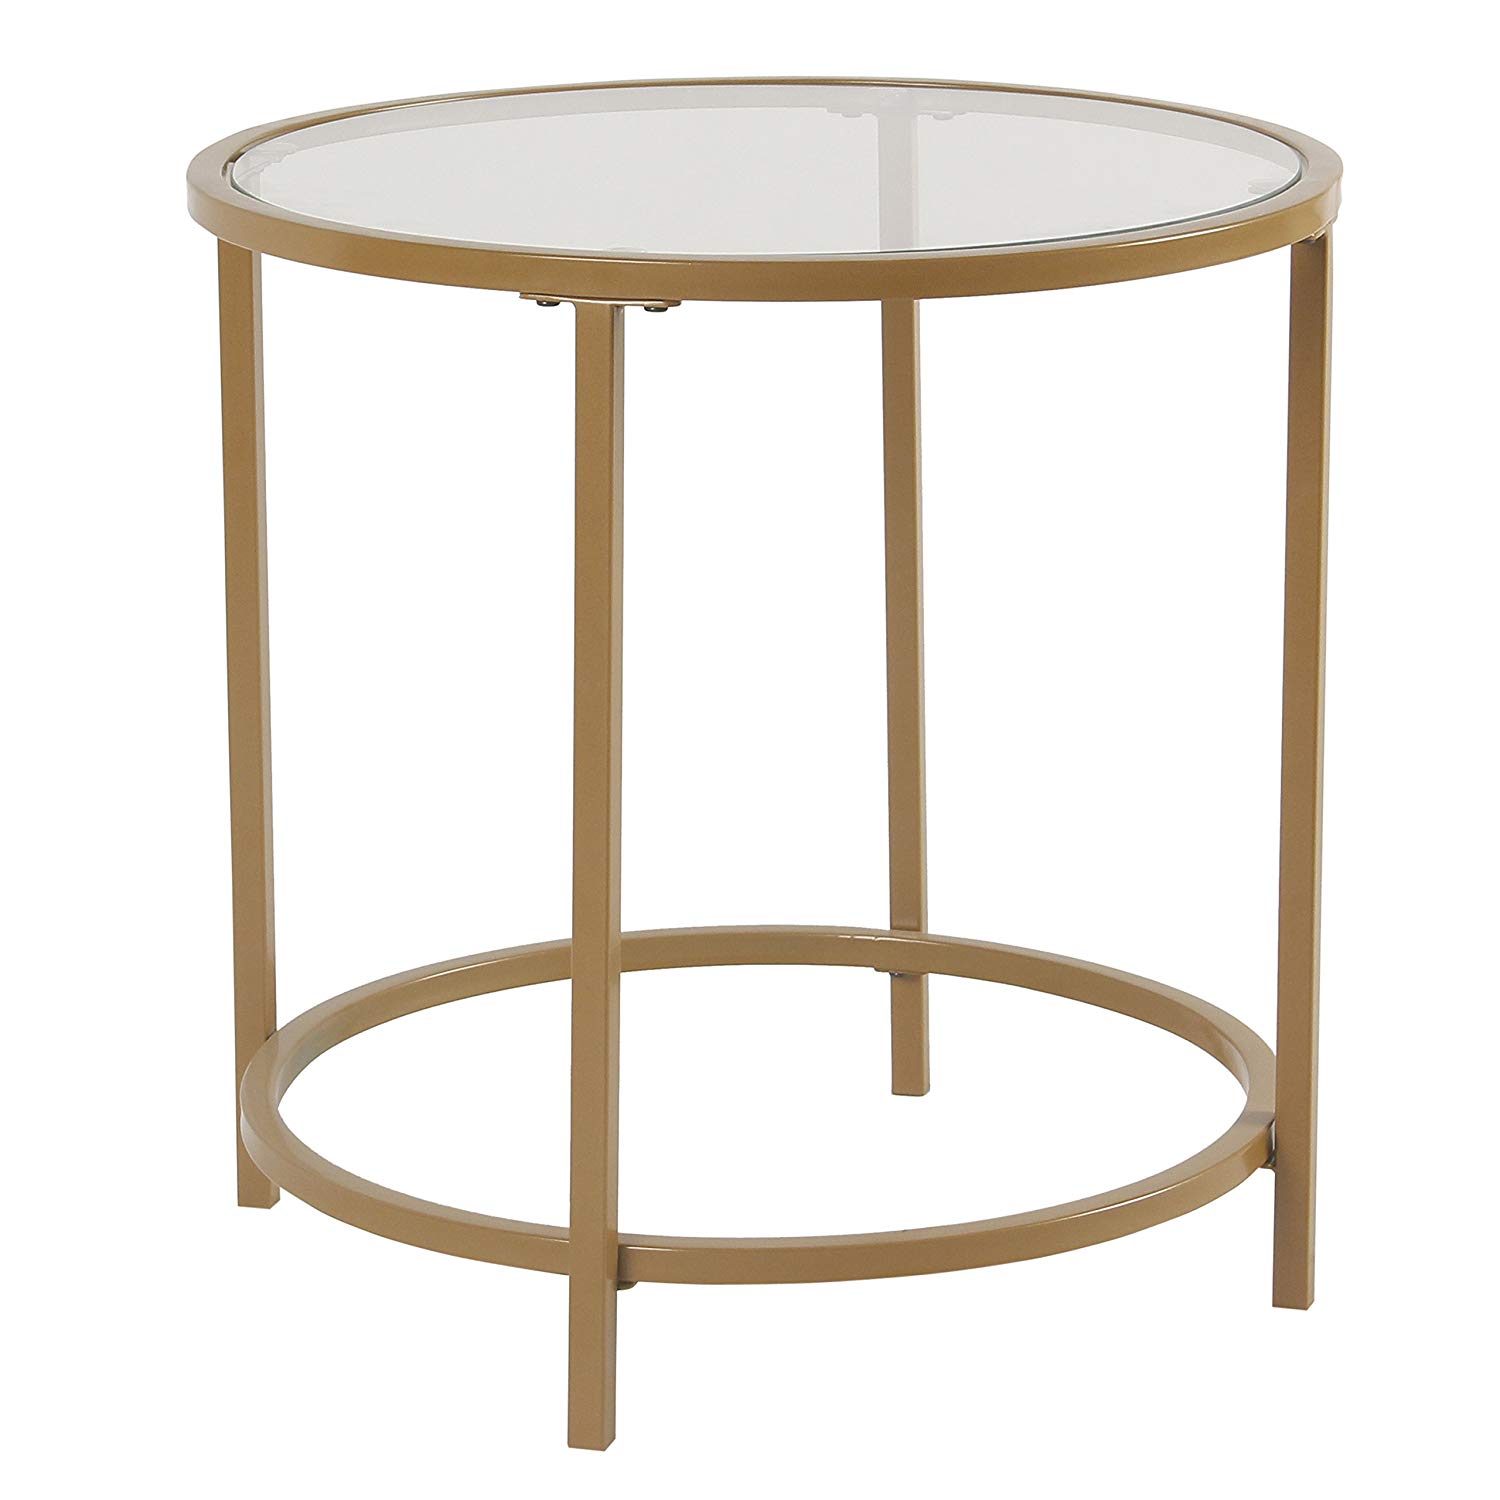 spatial order round metal accent table glass top gold iron end tables with tops kitchen dining mission style ethan allen dresser used pottery barn coffee light brown wood where